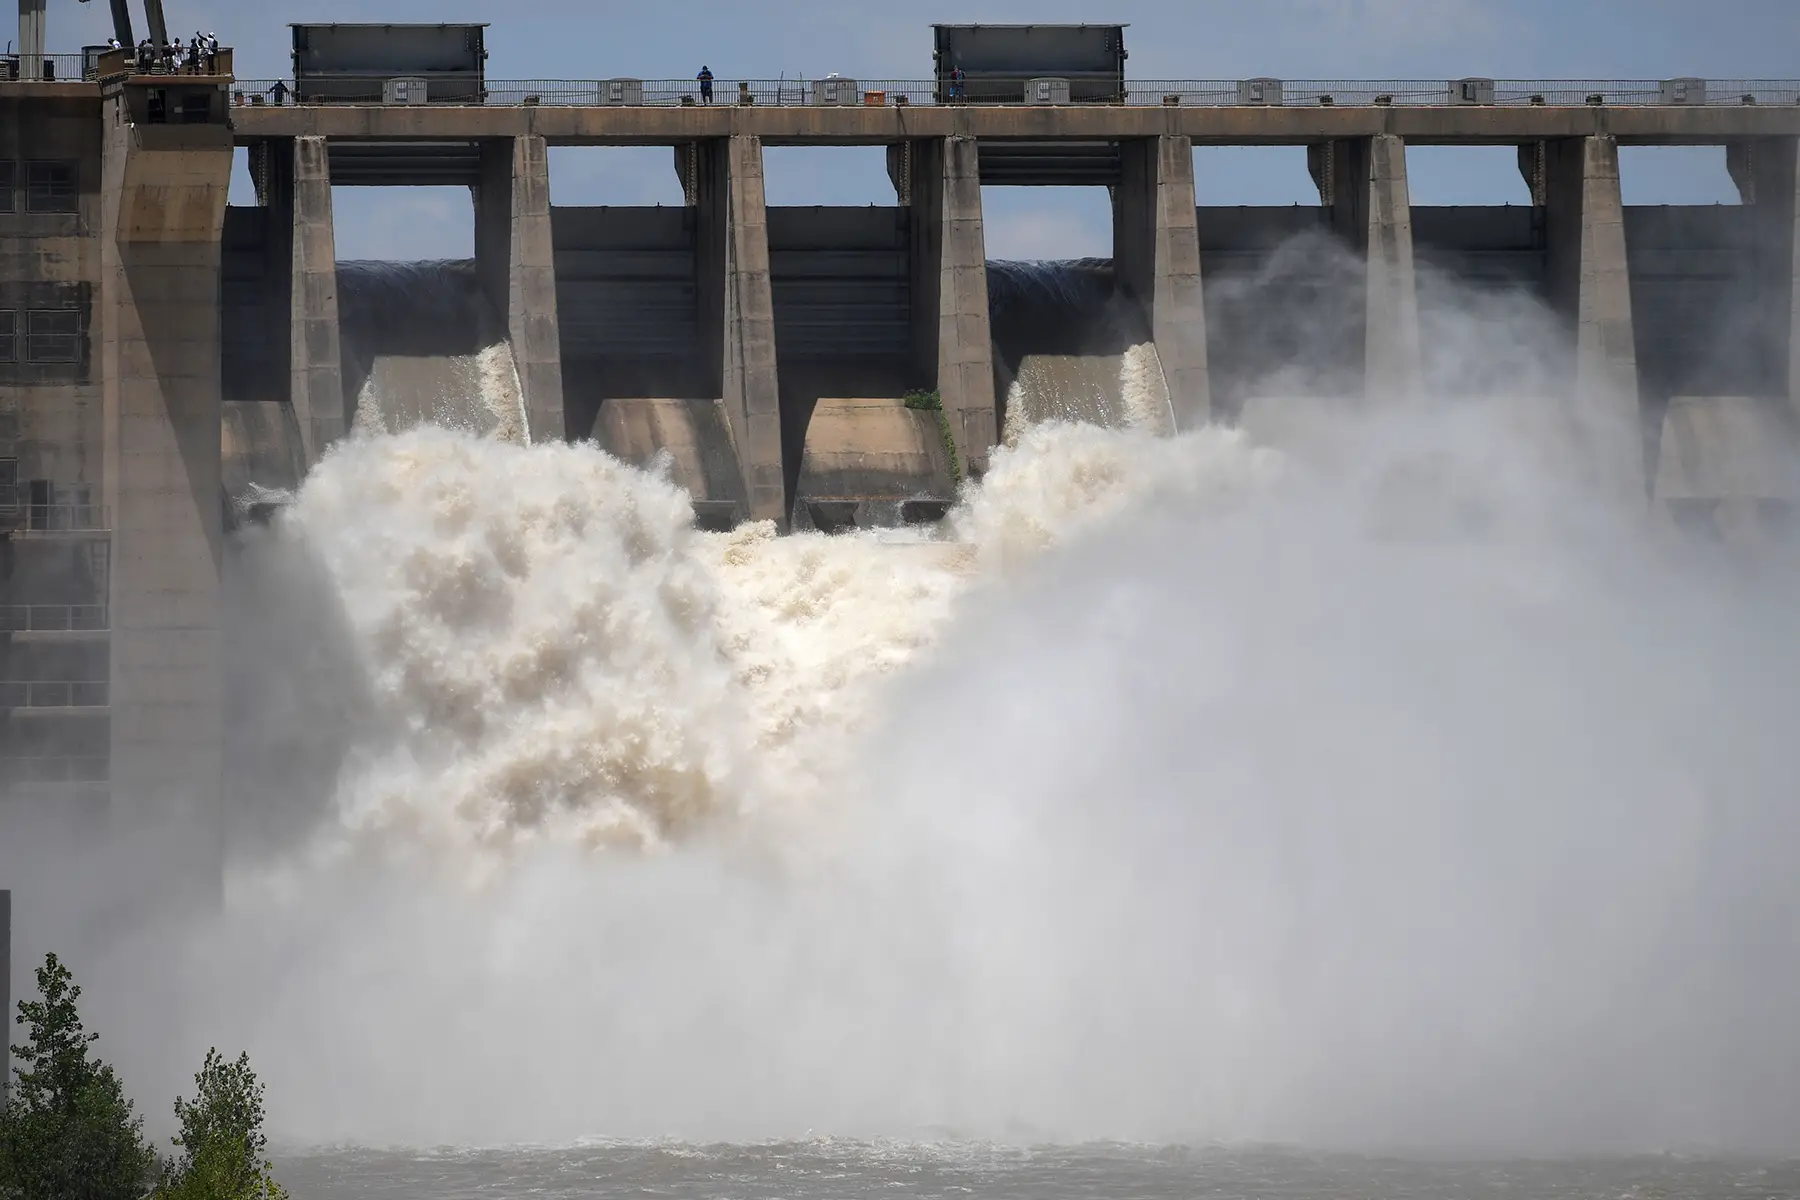 Water flows spectacularly from the Vaal Dam after several sluice gates were opened